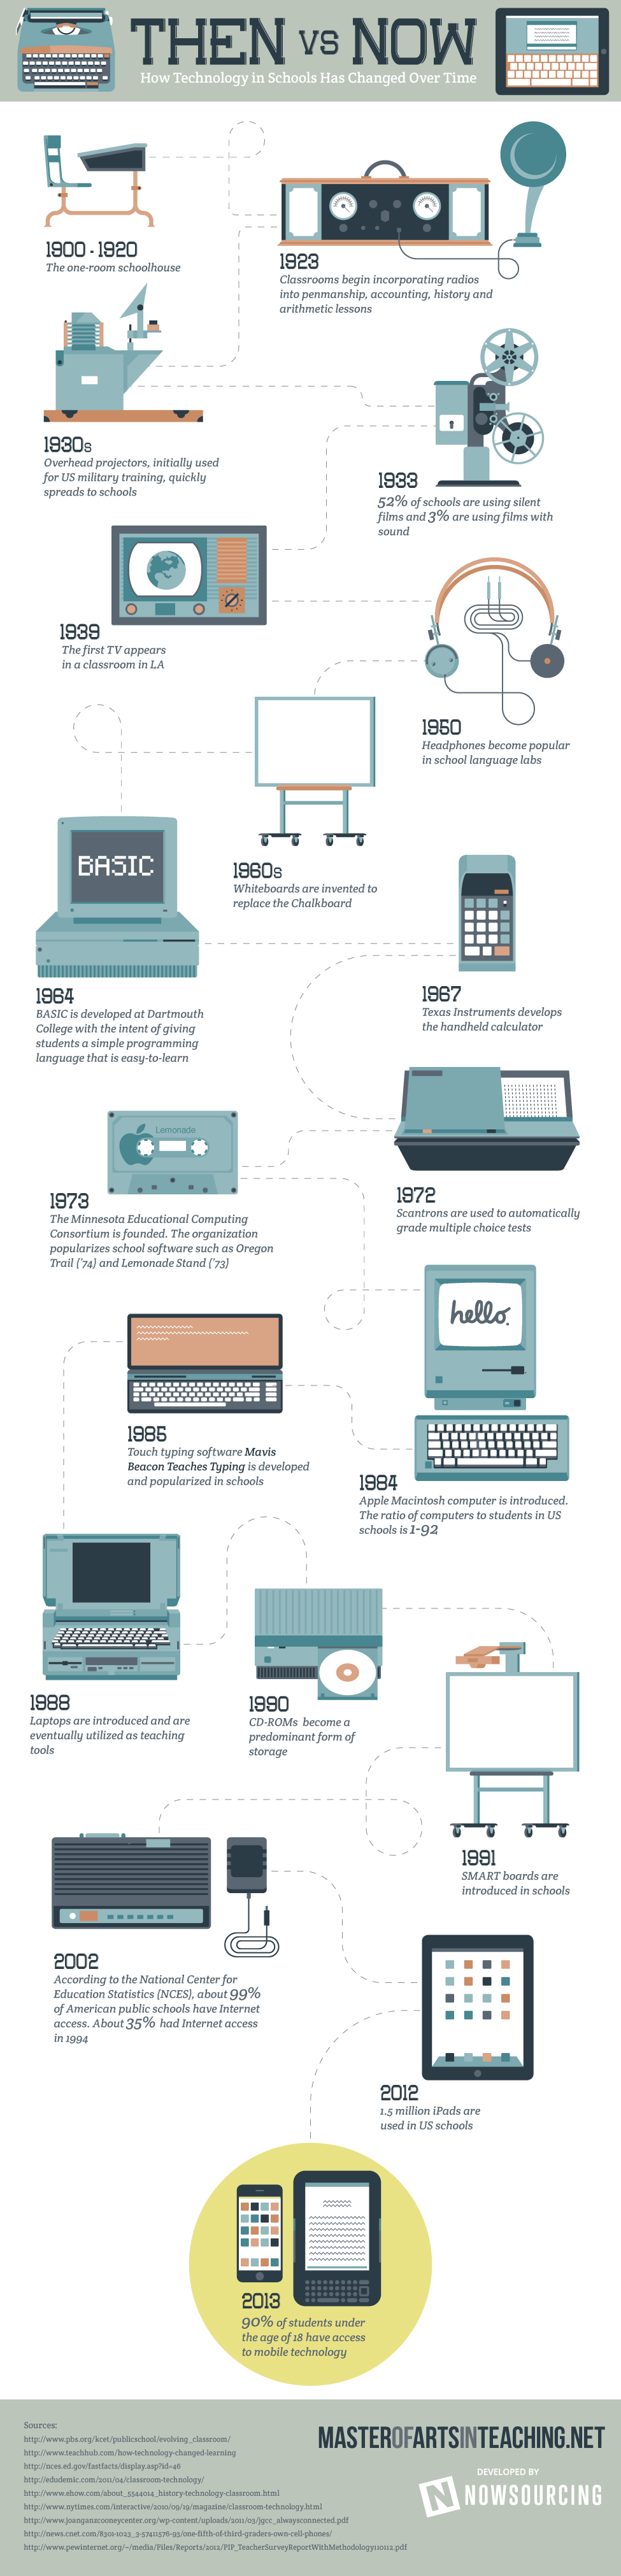 Timeline of Educational Technology in Schools Infographic